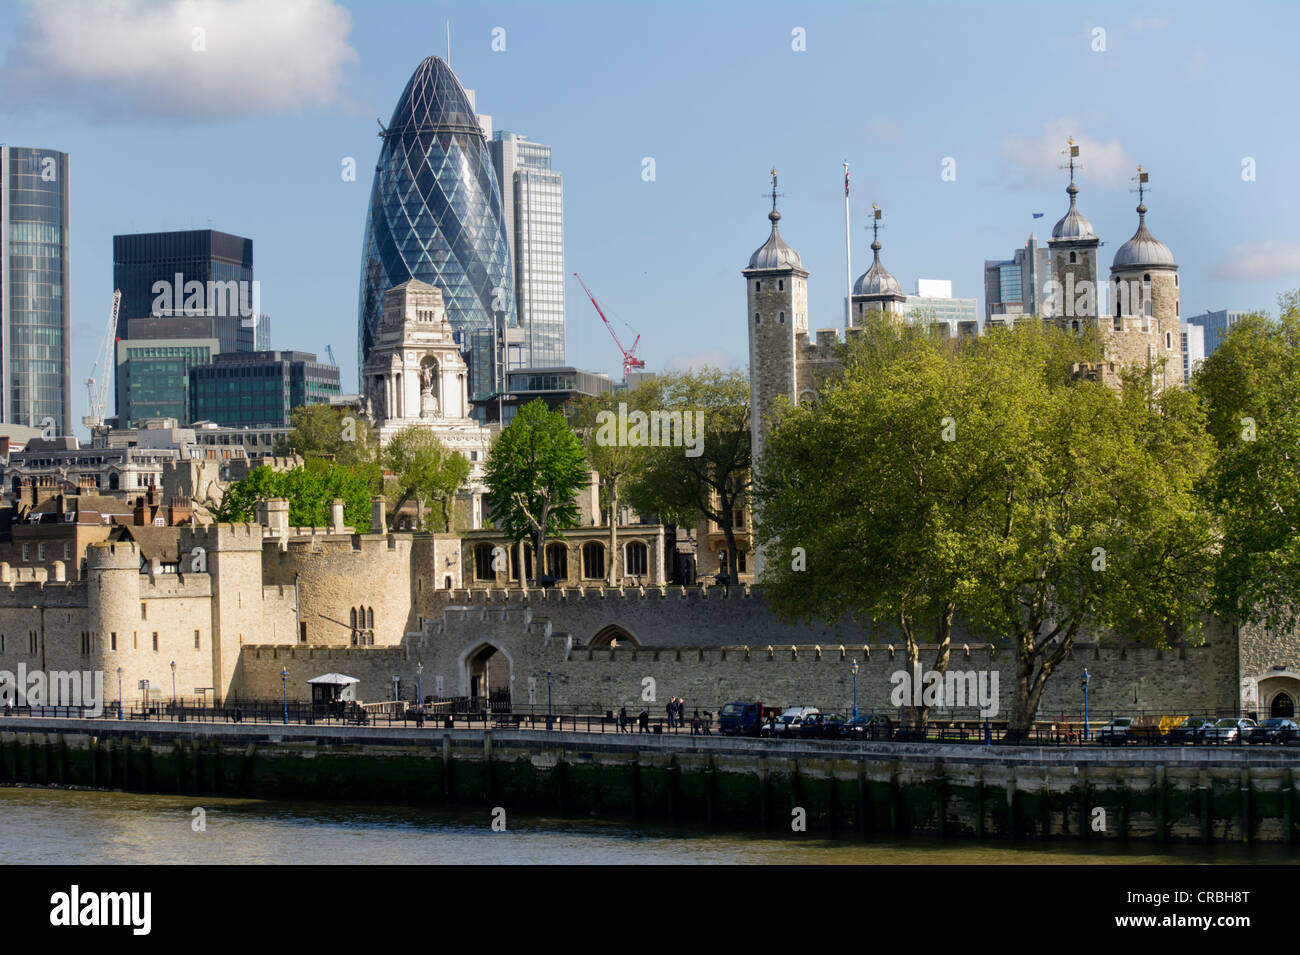 UK, England, London, City Gherkin and 10 Trinity Square monument Stock Photo